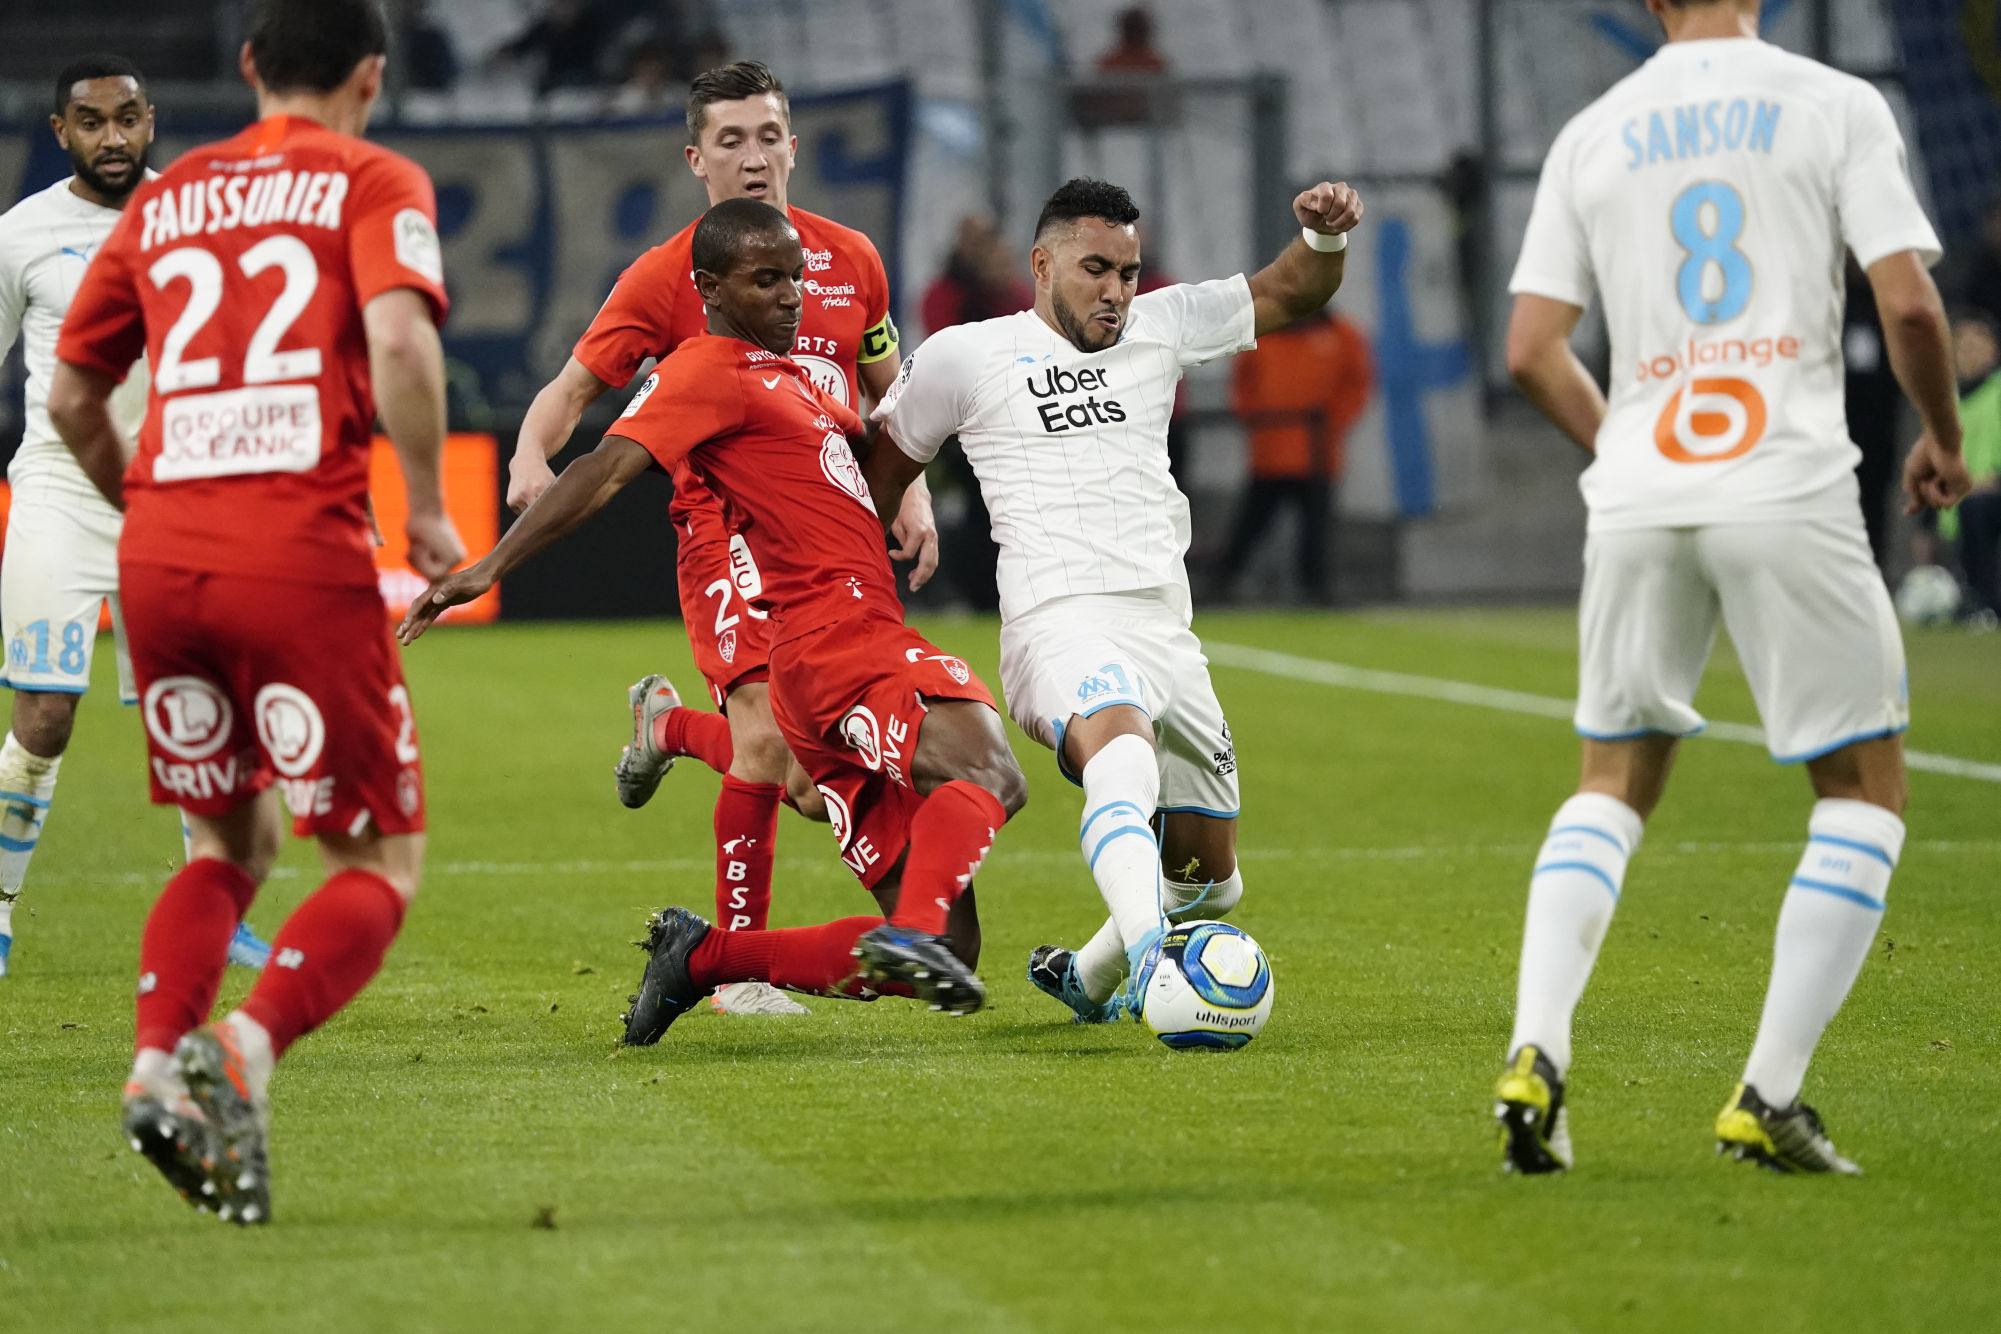 (R-L) Dimitri PAYET of Marseille and Ibrahima DIALLO of Brest during the Ligue 1 match between Marseille and Brest at Stade Velodrome on November 29, 2019 in Marseille, France. (Photo by Dave Winter/Icon Sport) - Orange Vélodrome - Marseille (France)